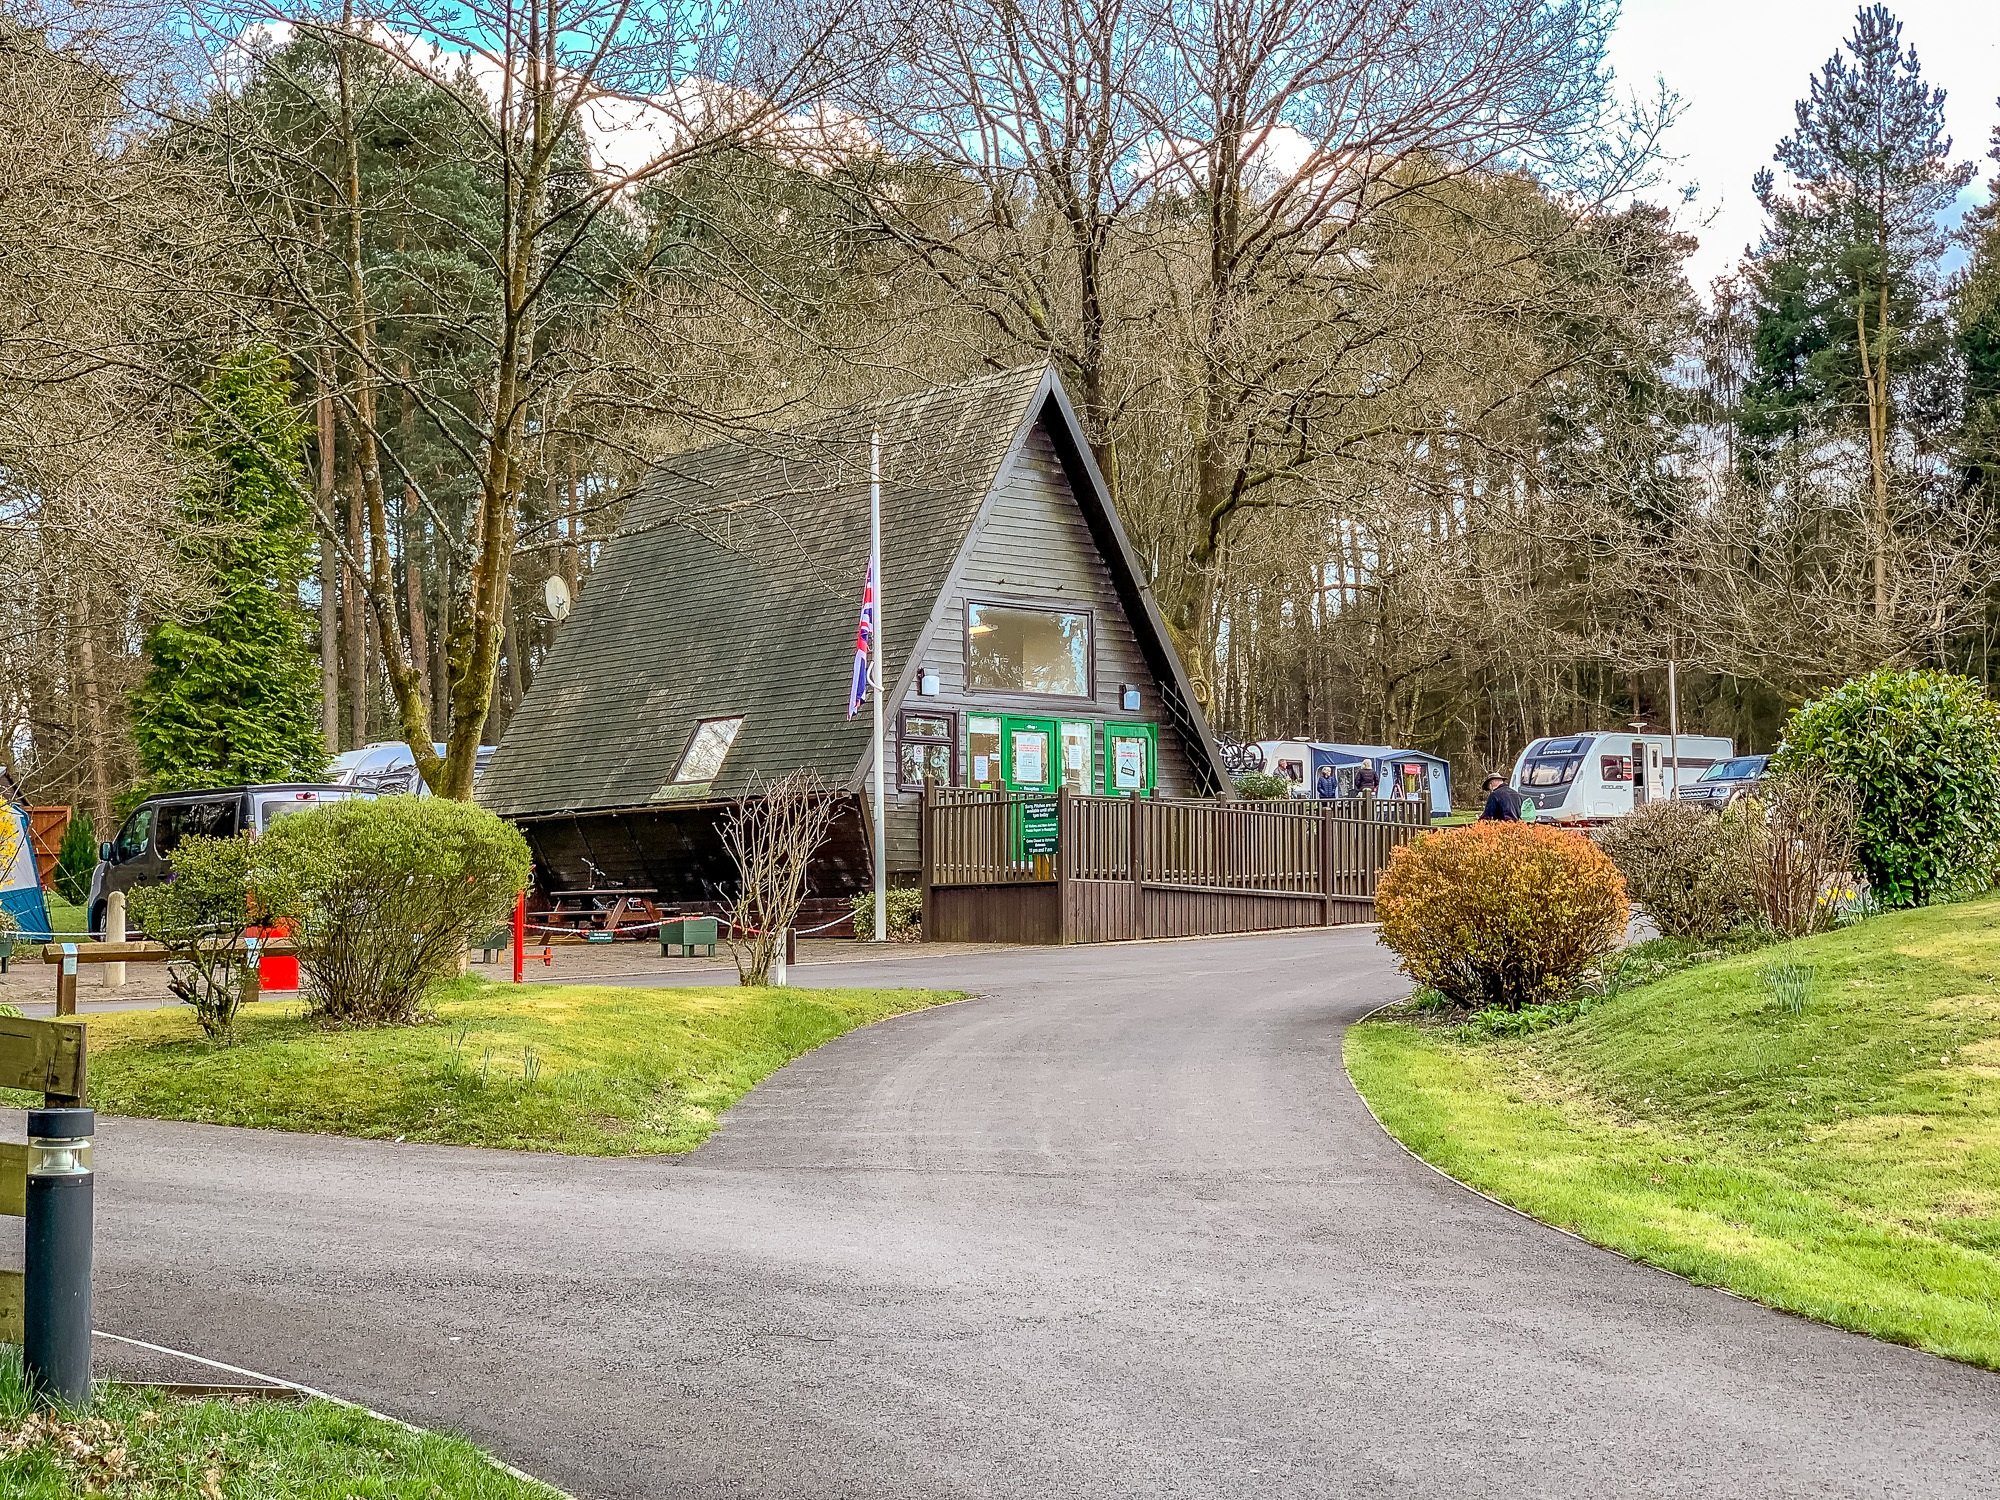 Cannock Chase Campsite